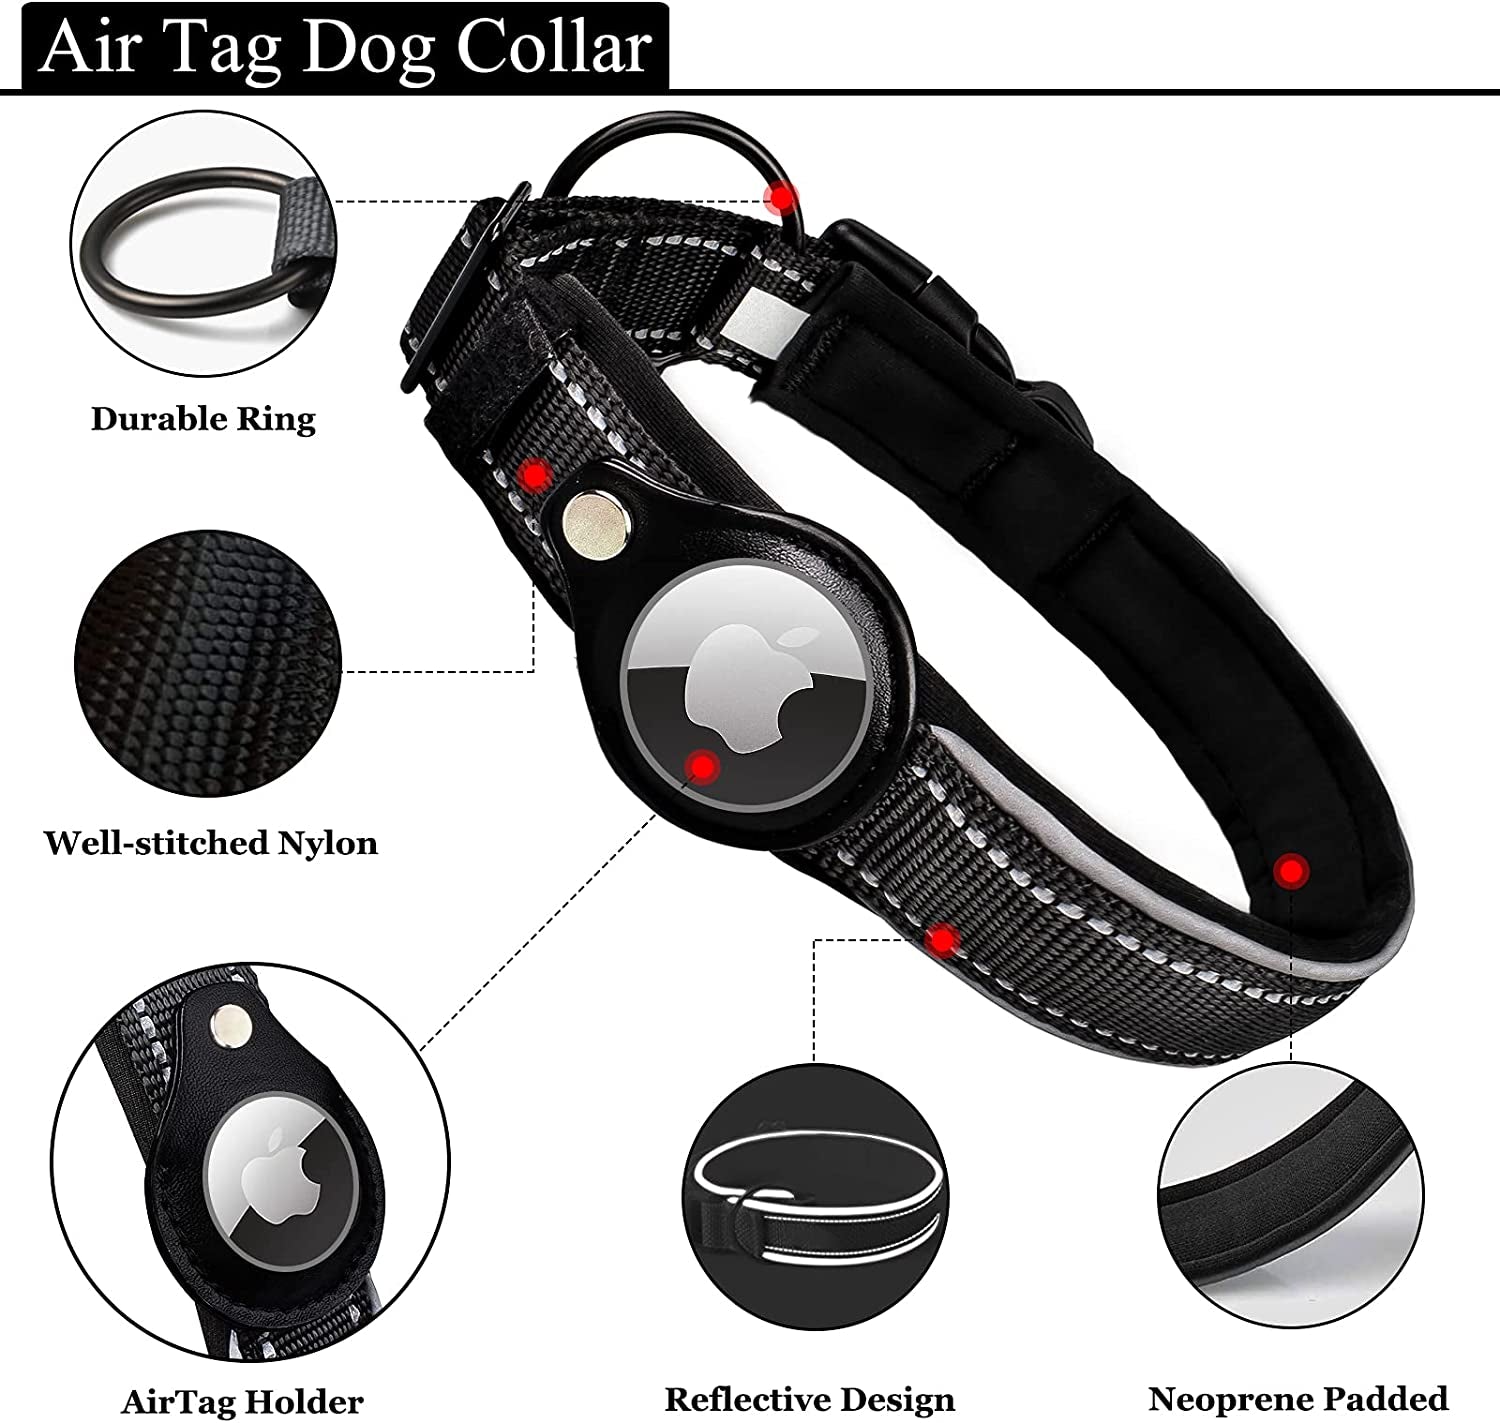 IVIENX Airtag Dog Collar, [Black - Size S] Reflective Apple Airtag Dog Collar, Thick Air Tag Dog Collar, Integrated Airtag Dog Collar Holder for Small Medium Large Dogs